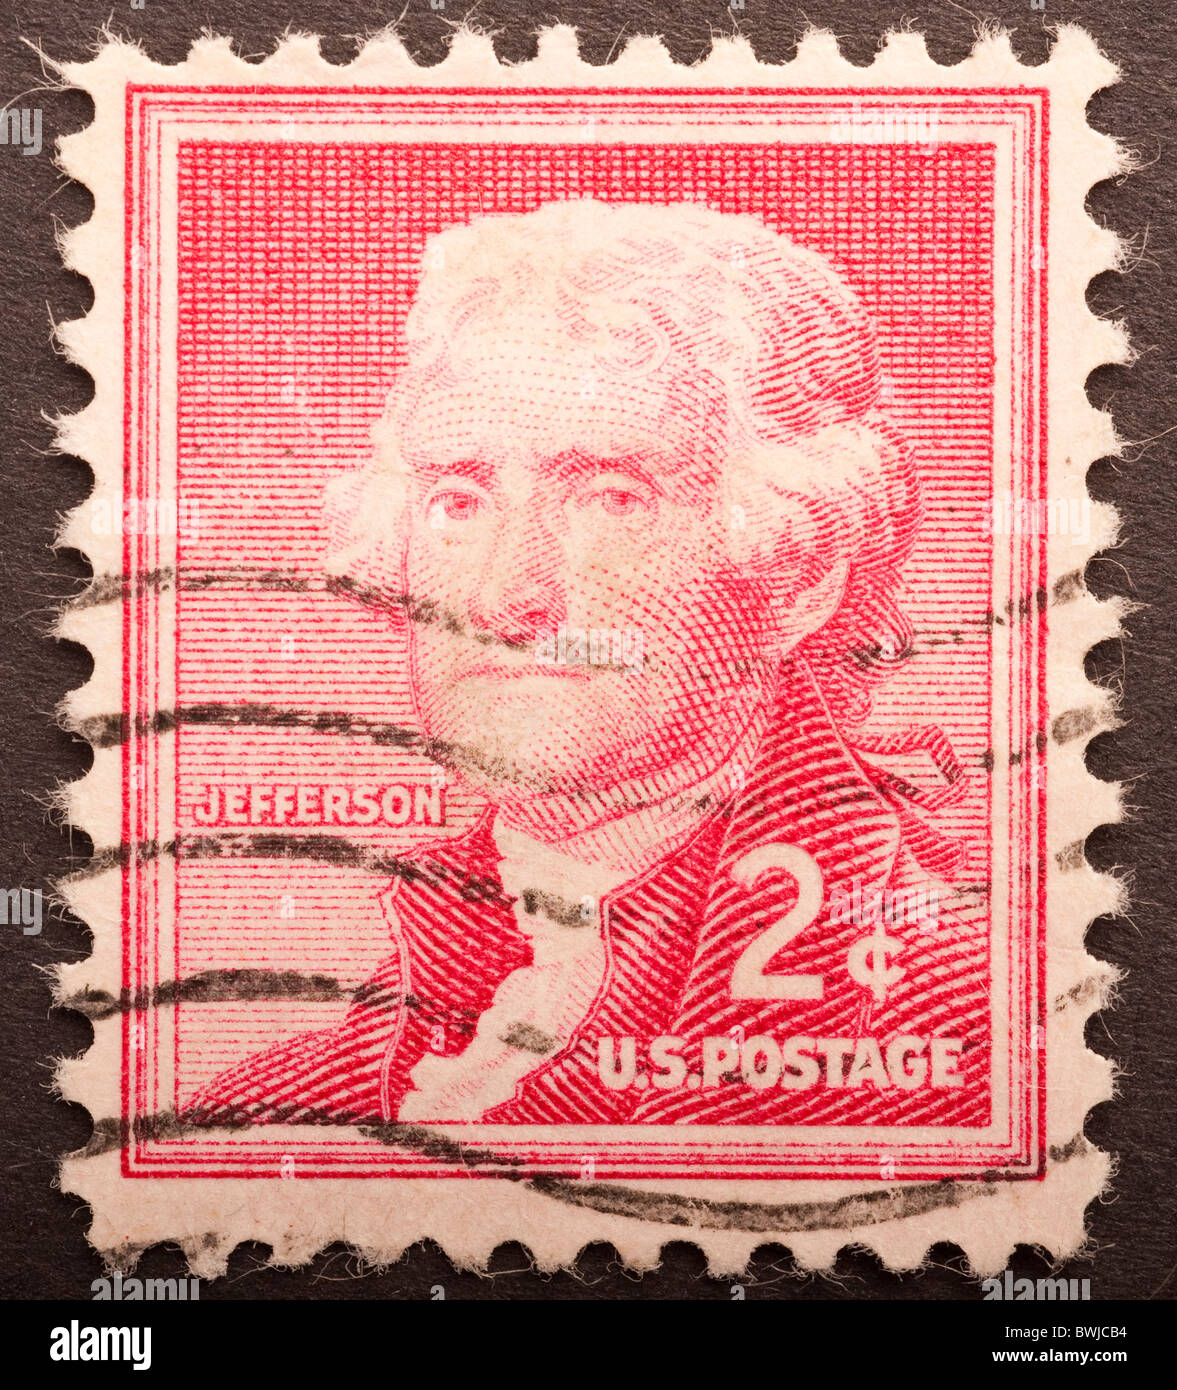 United States Postage 2 cents Banque D'Images